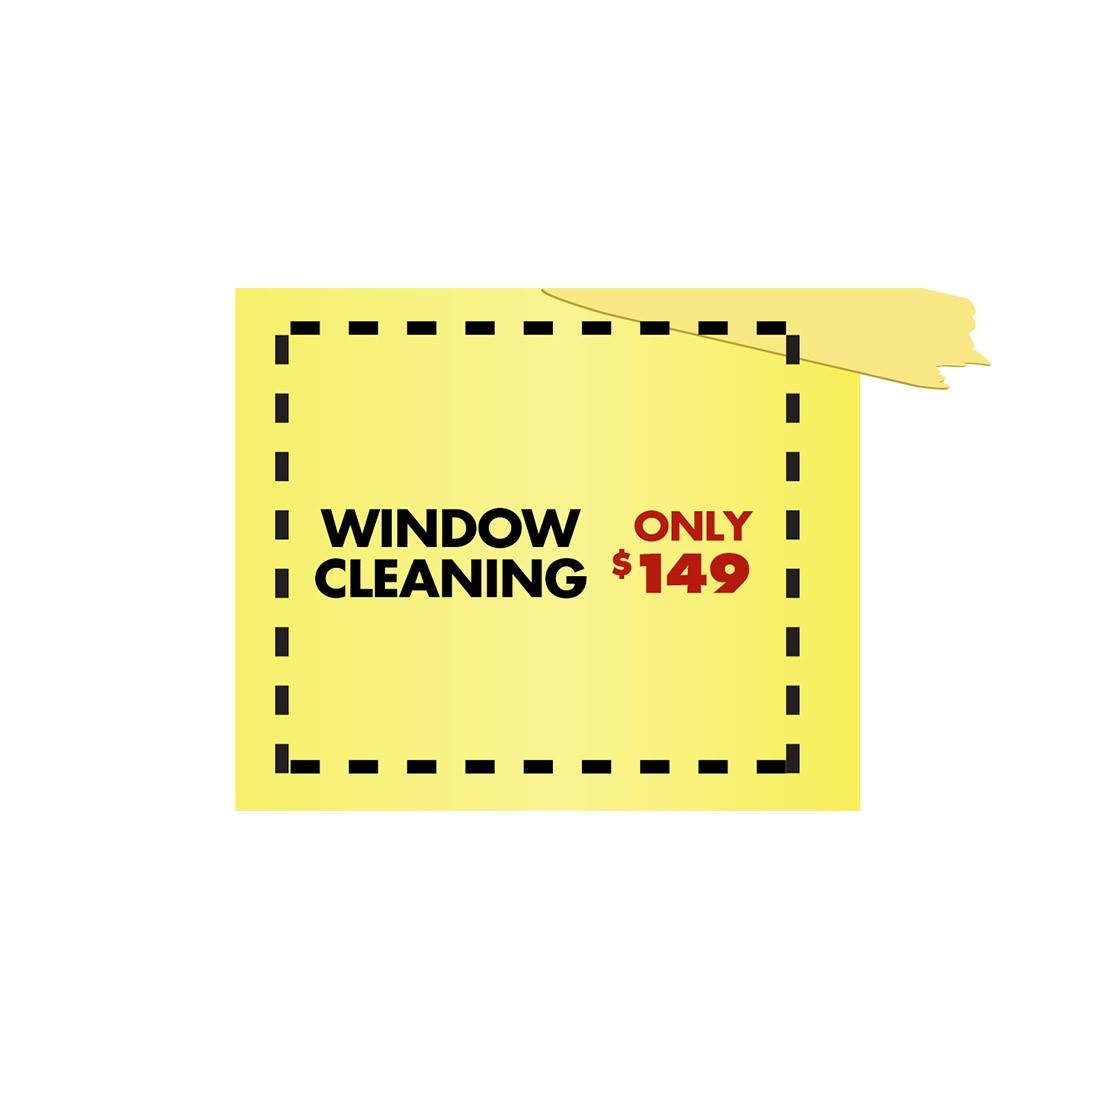 Post-It Design Suite - Window Cleaning - Facebook Ad View